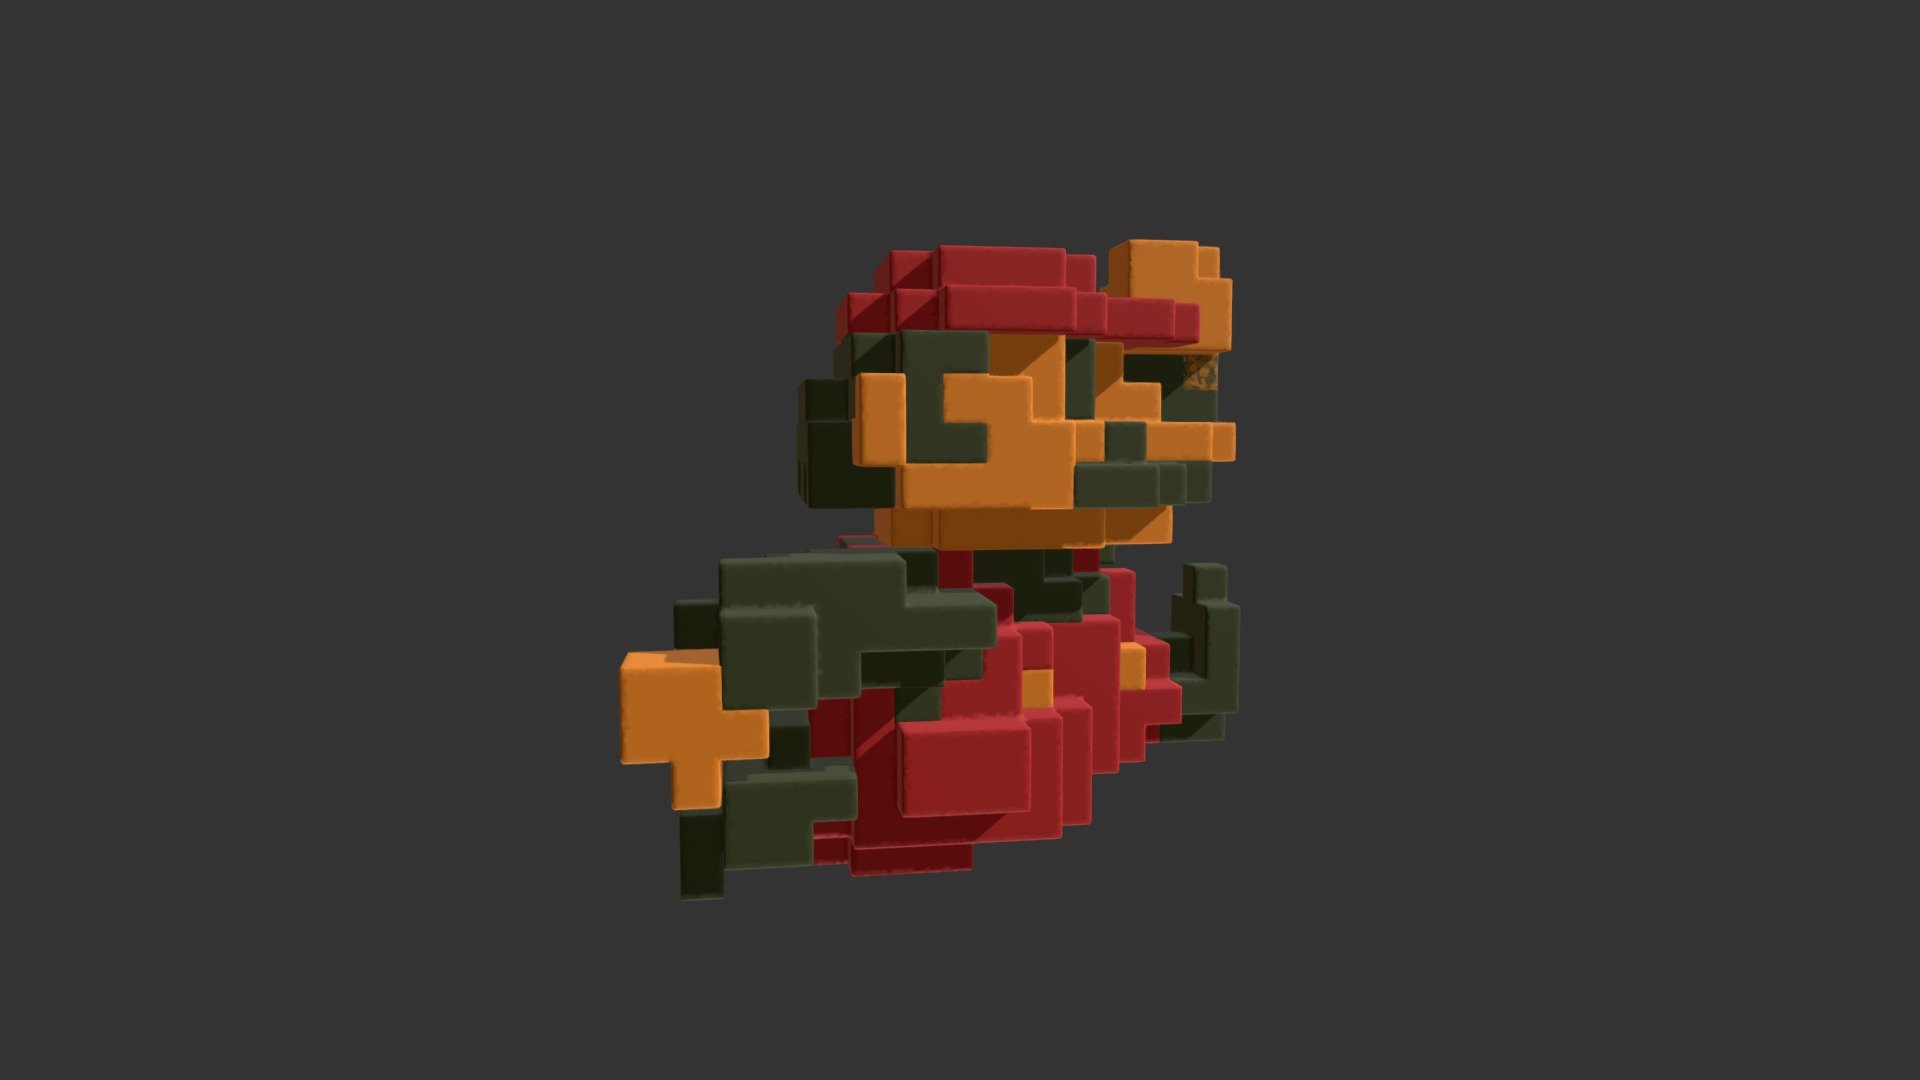 Patreon: https://www.patreon.com/haepon

This is the voxel Mario created by 3DCG 3d model